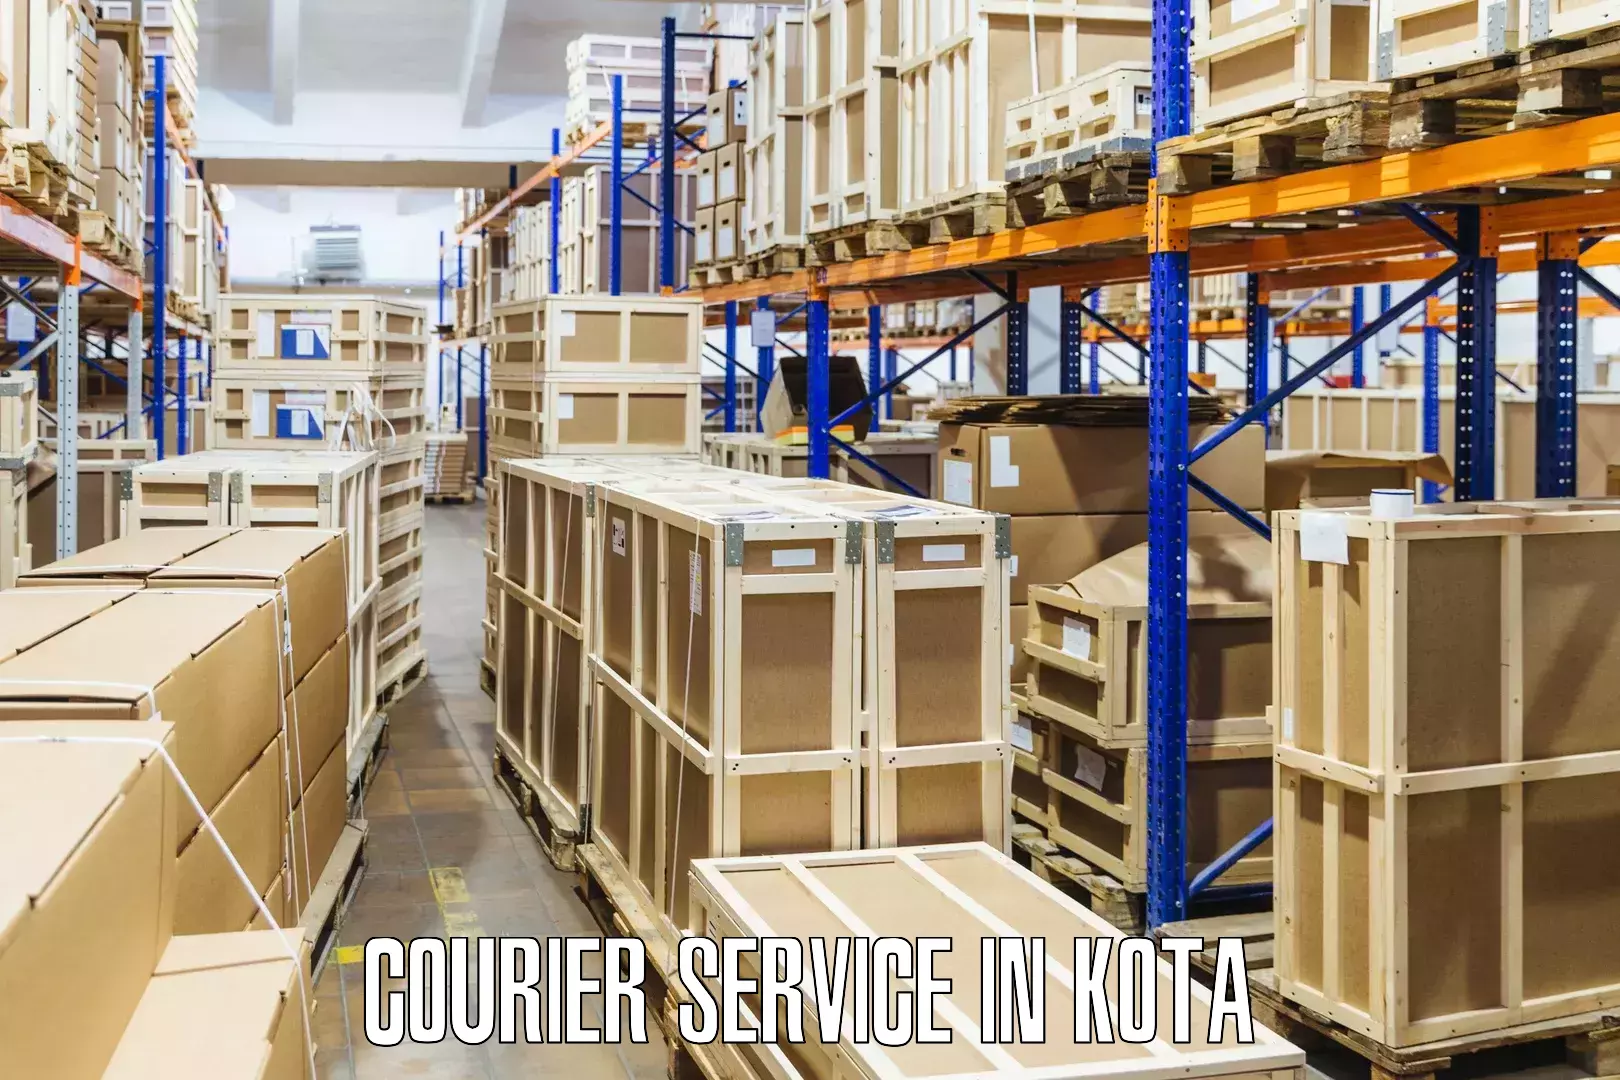 Comprehensive shipping services in Kota